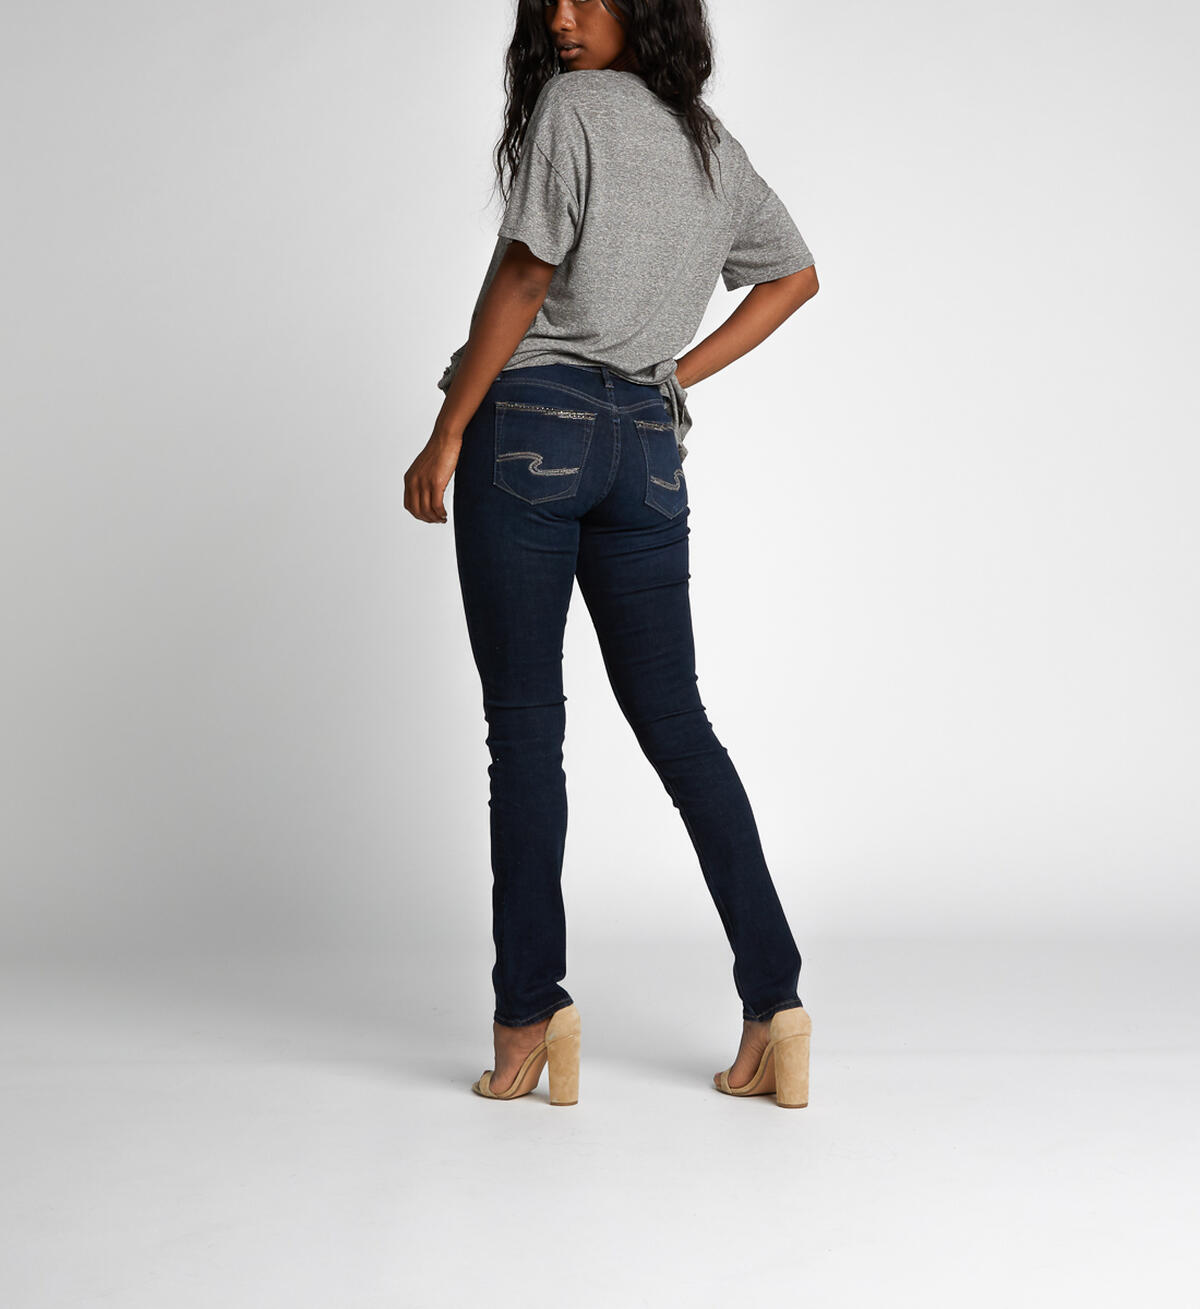 Avery High-Rise Curvy Straight Leg Jeans, , hi-res image number 1